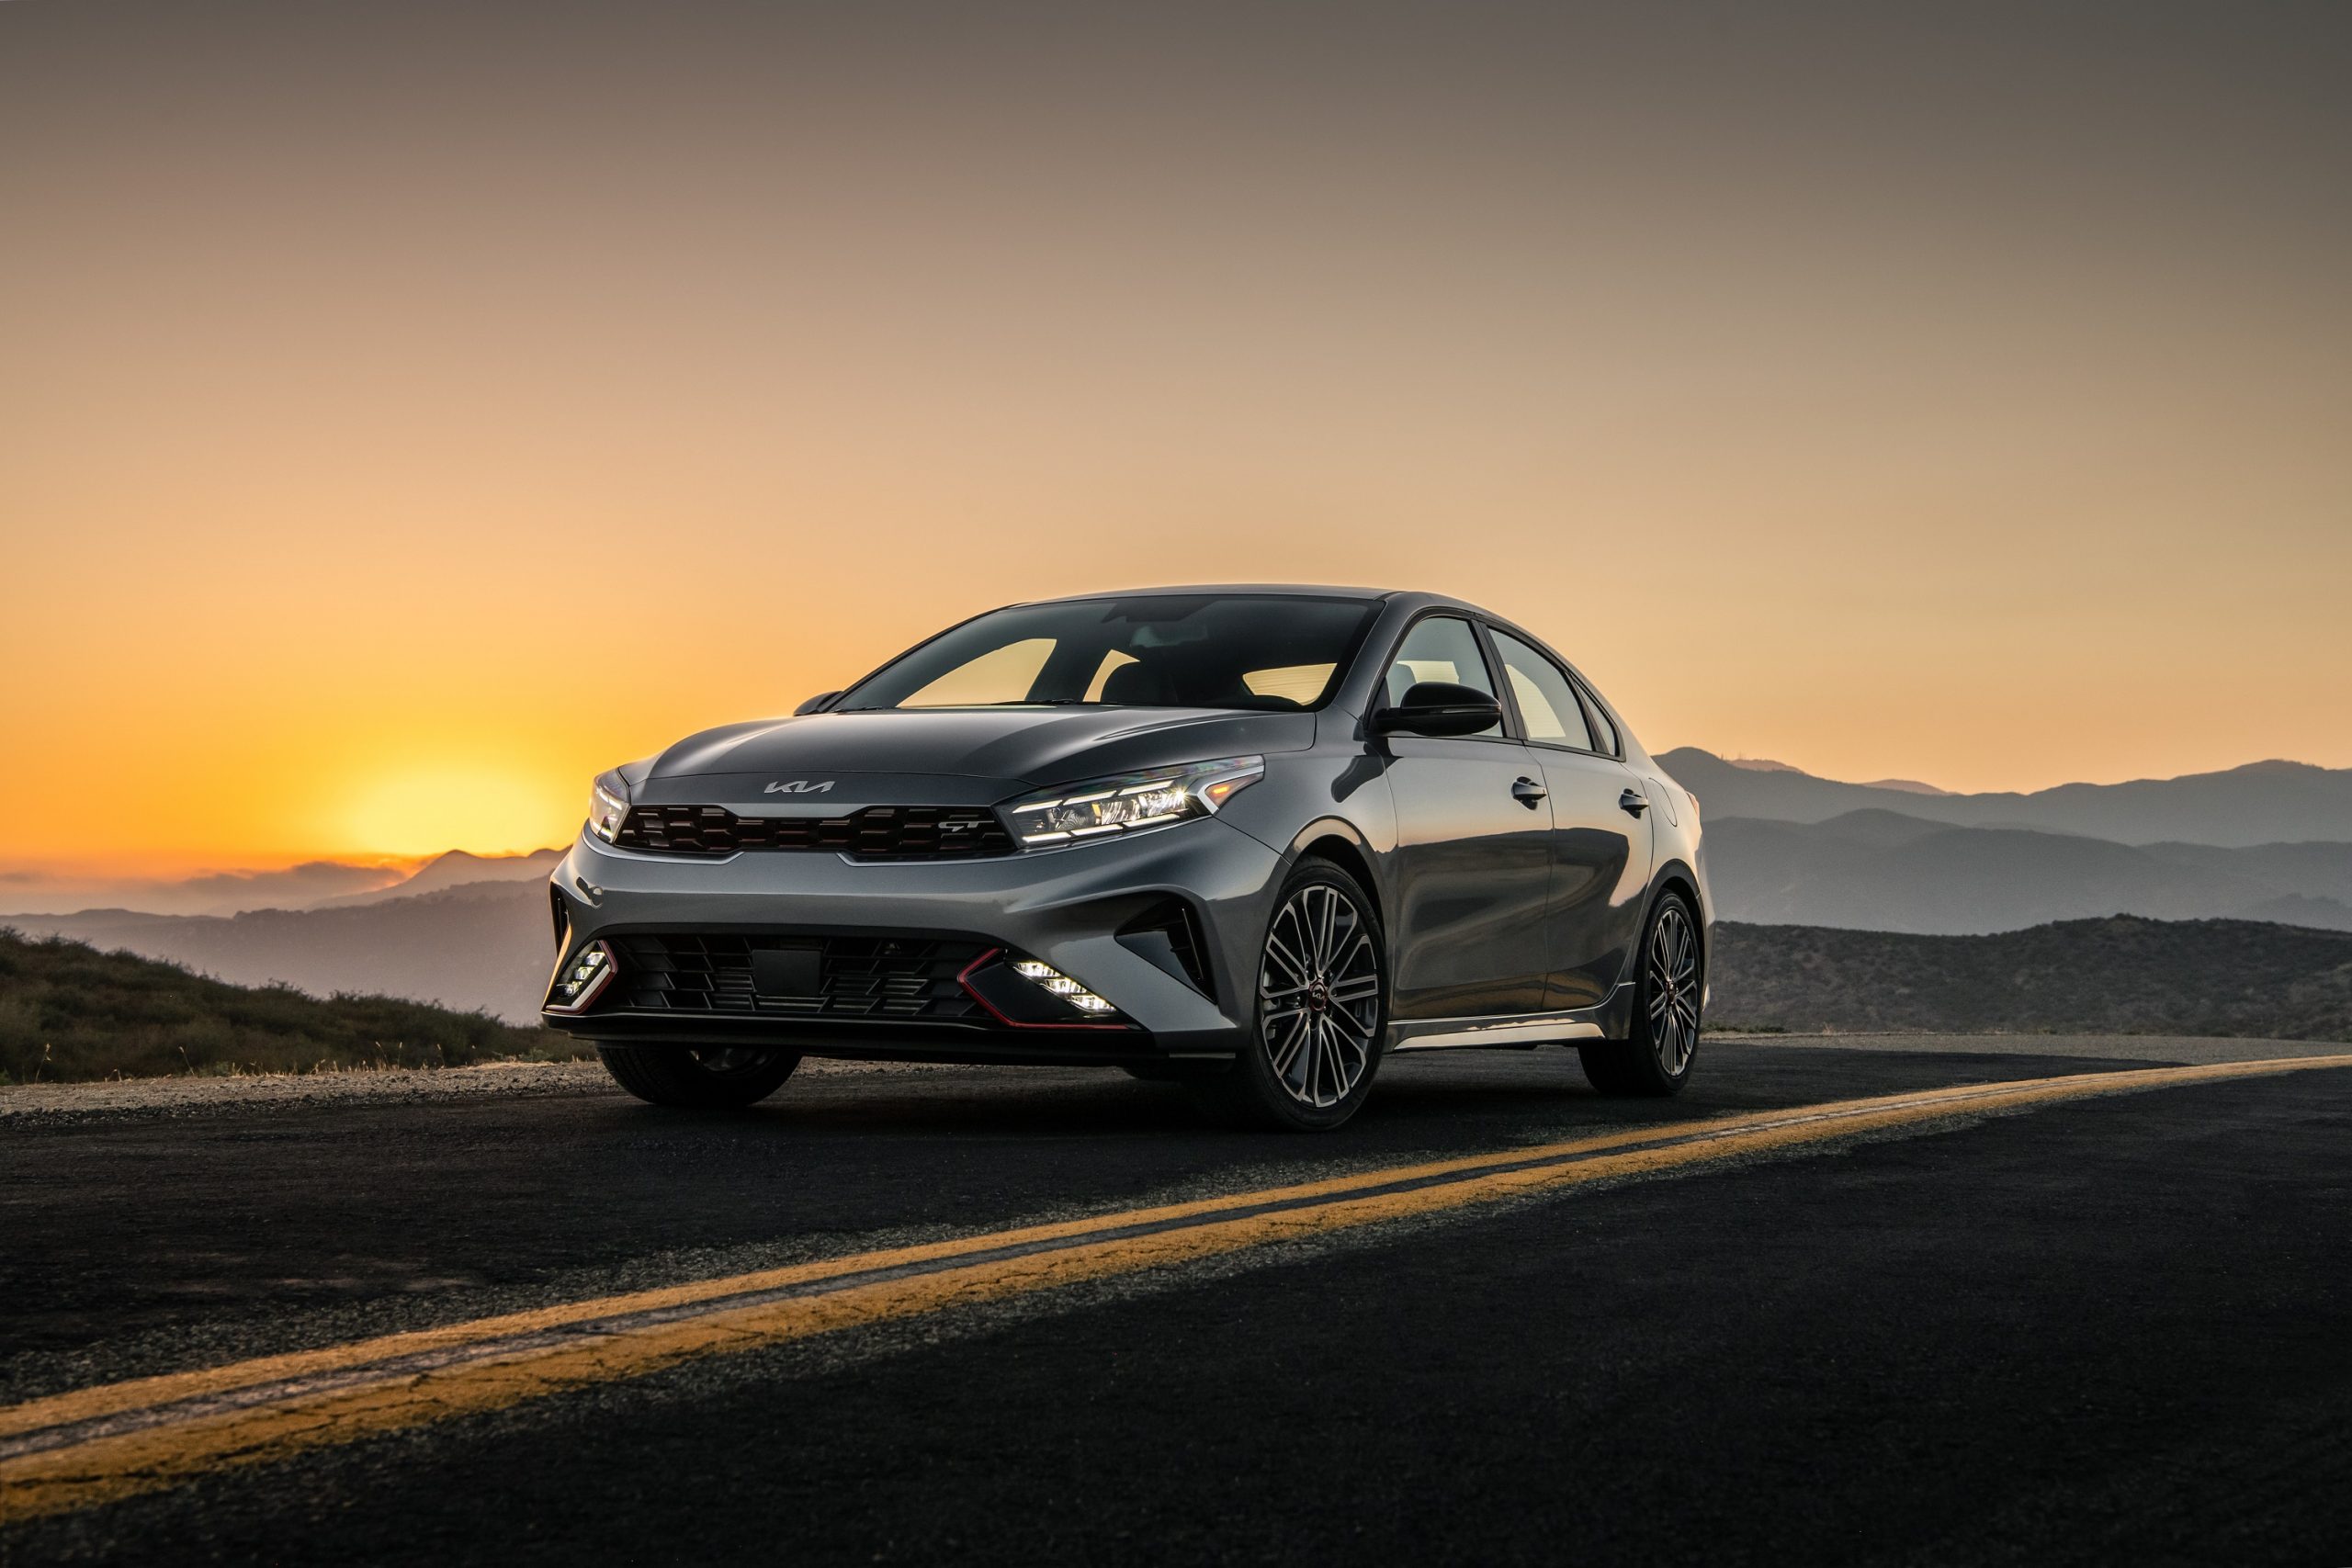 The 2022 Kia Forte GT shot at sunset on a mountain road from the front 3/4 angle